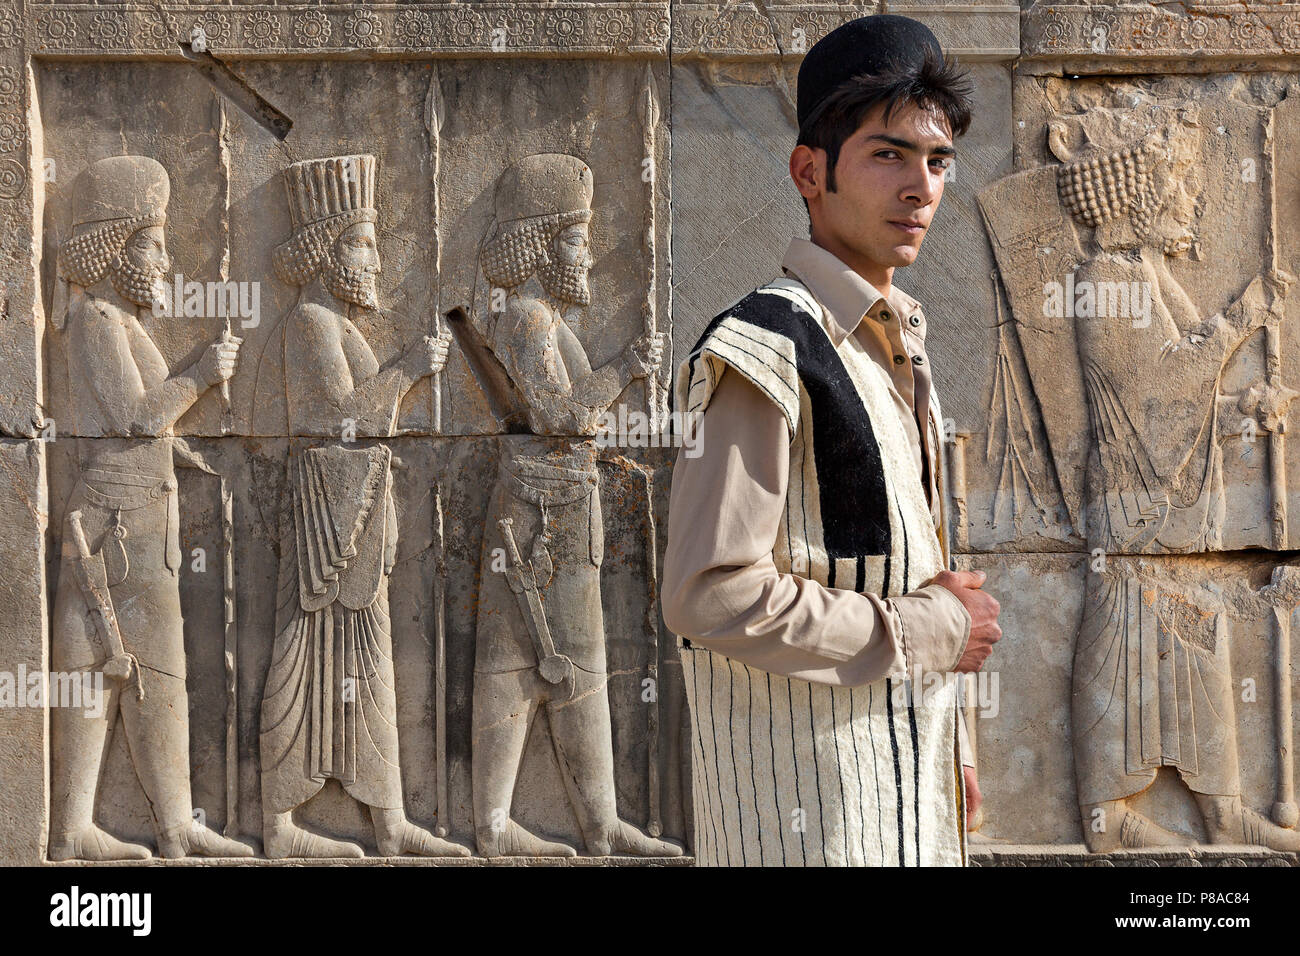 Ethnic Bakhtiari young man in his traditional clothes with Persian reliefs behind him, in Persepolis, Iran. Stock Photo